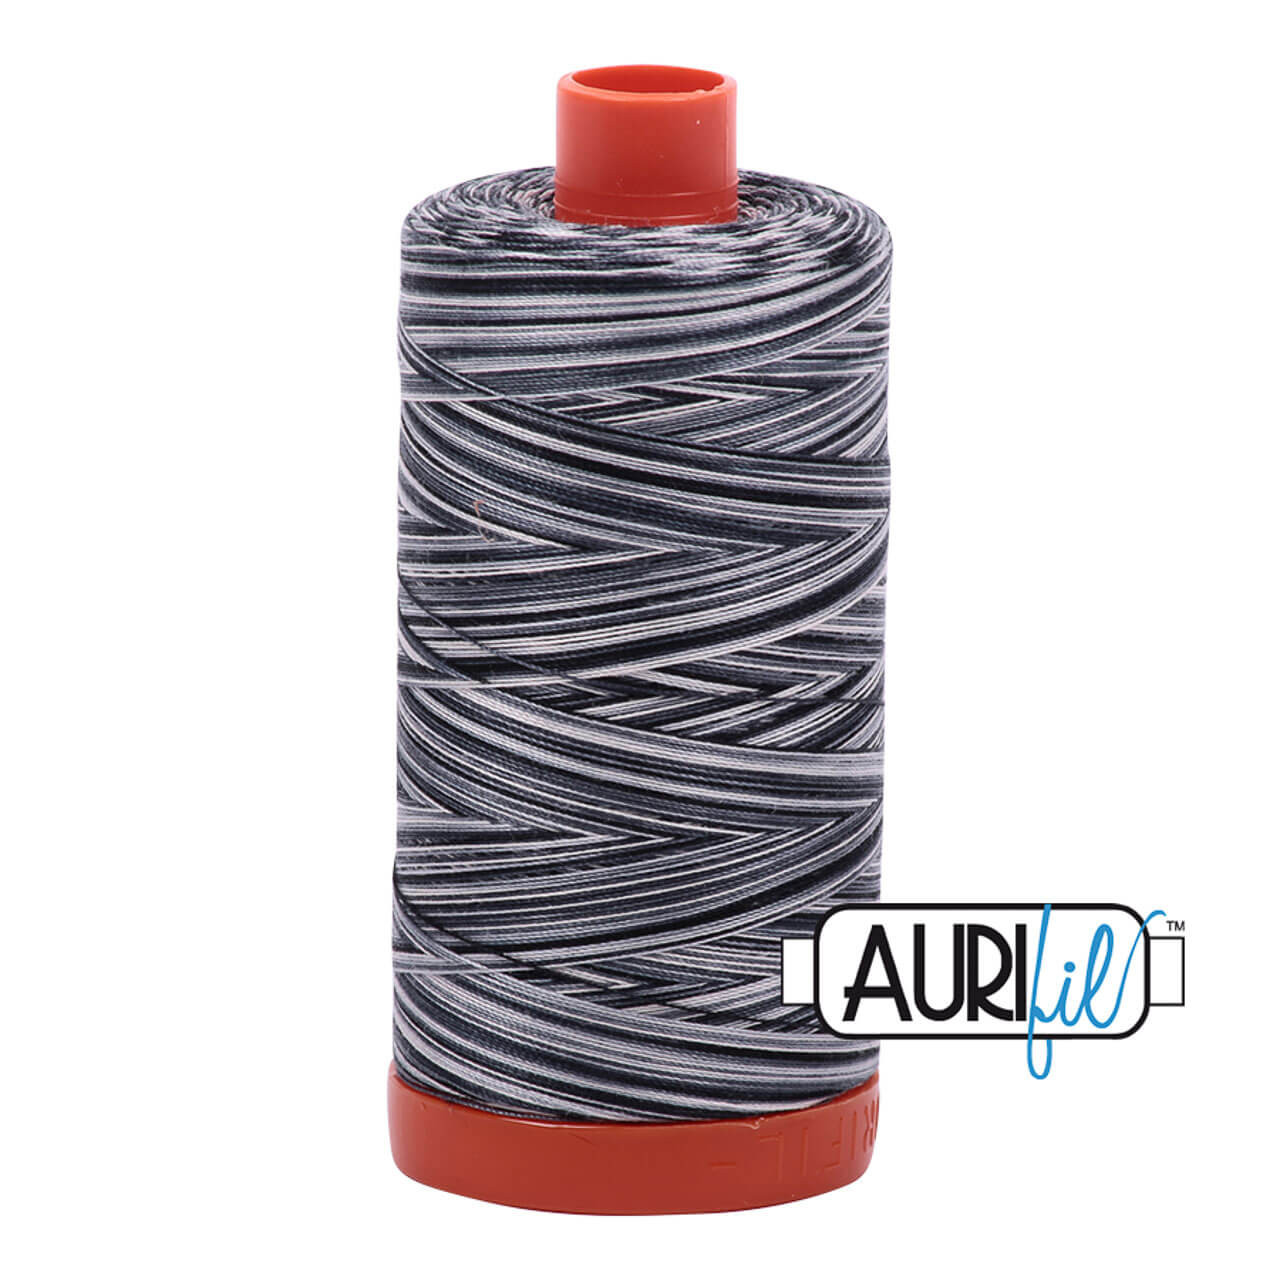 Large spool of Aurifil Graphite 50wt Egyptian cotton thread, black and grey variegated with Aurifil logo